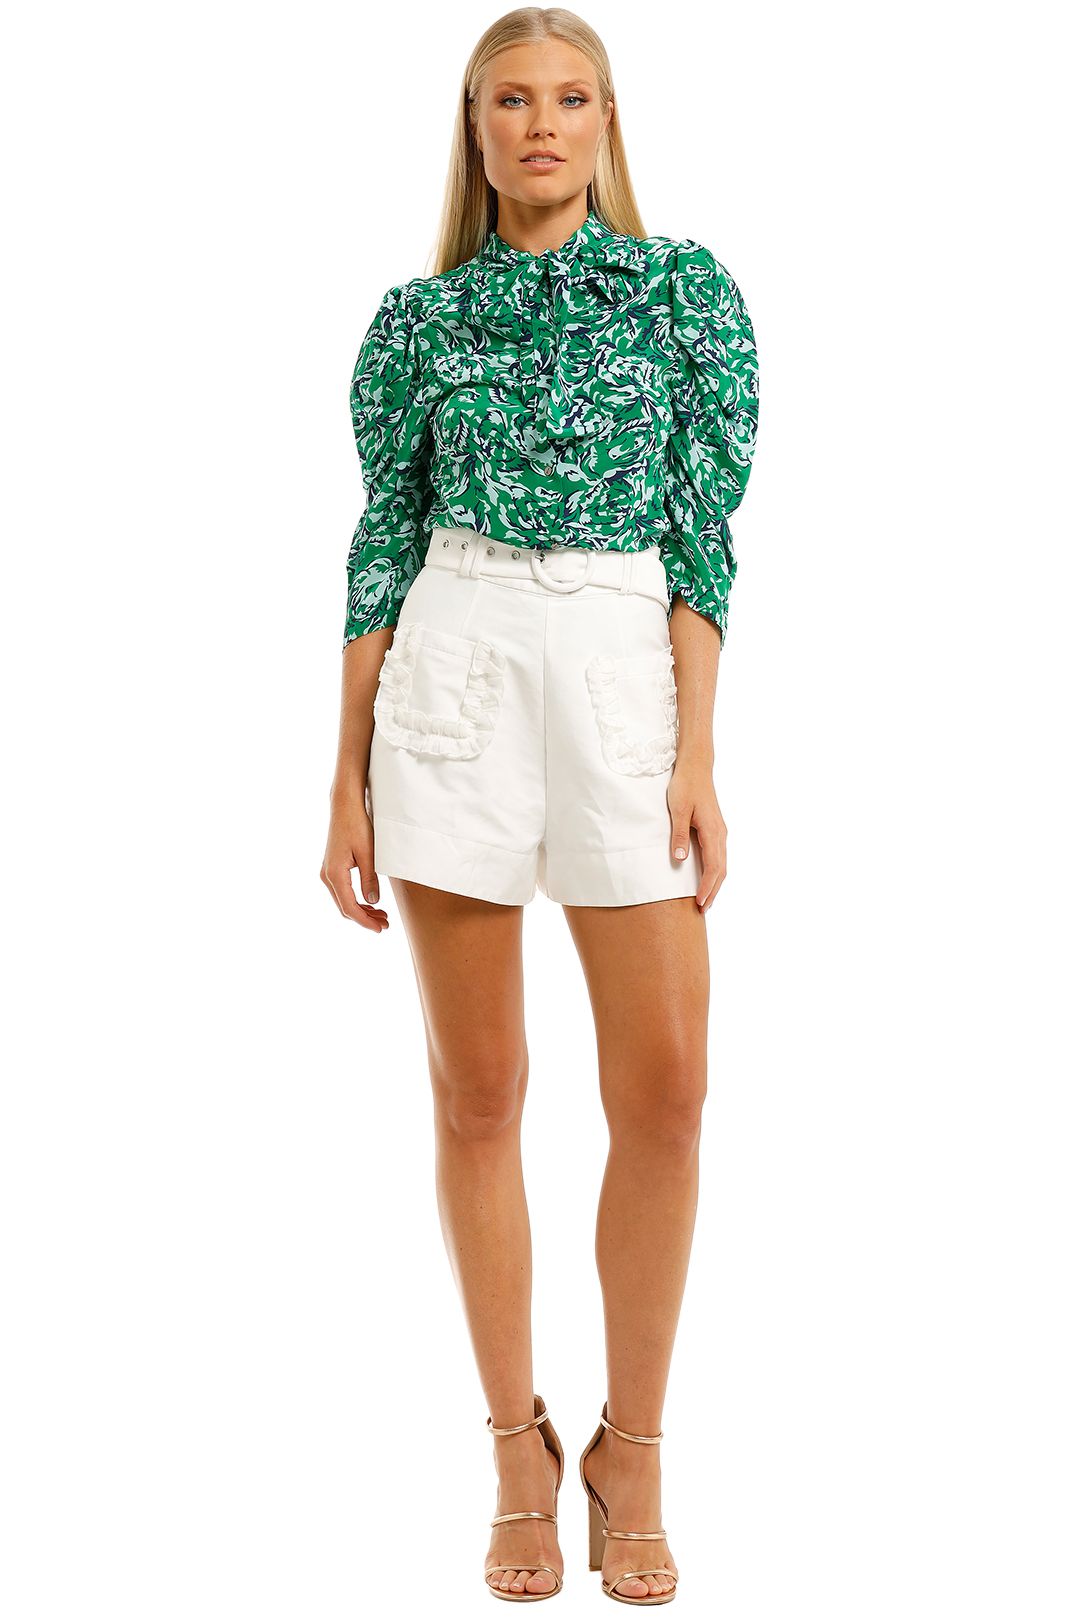 Ginger-and-Smart-Regenerate-Blouse-Green-Floral-Front